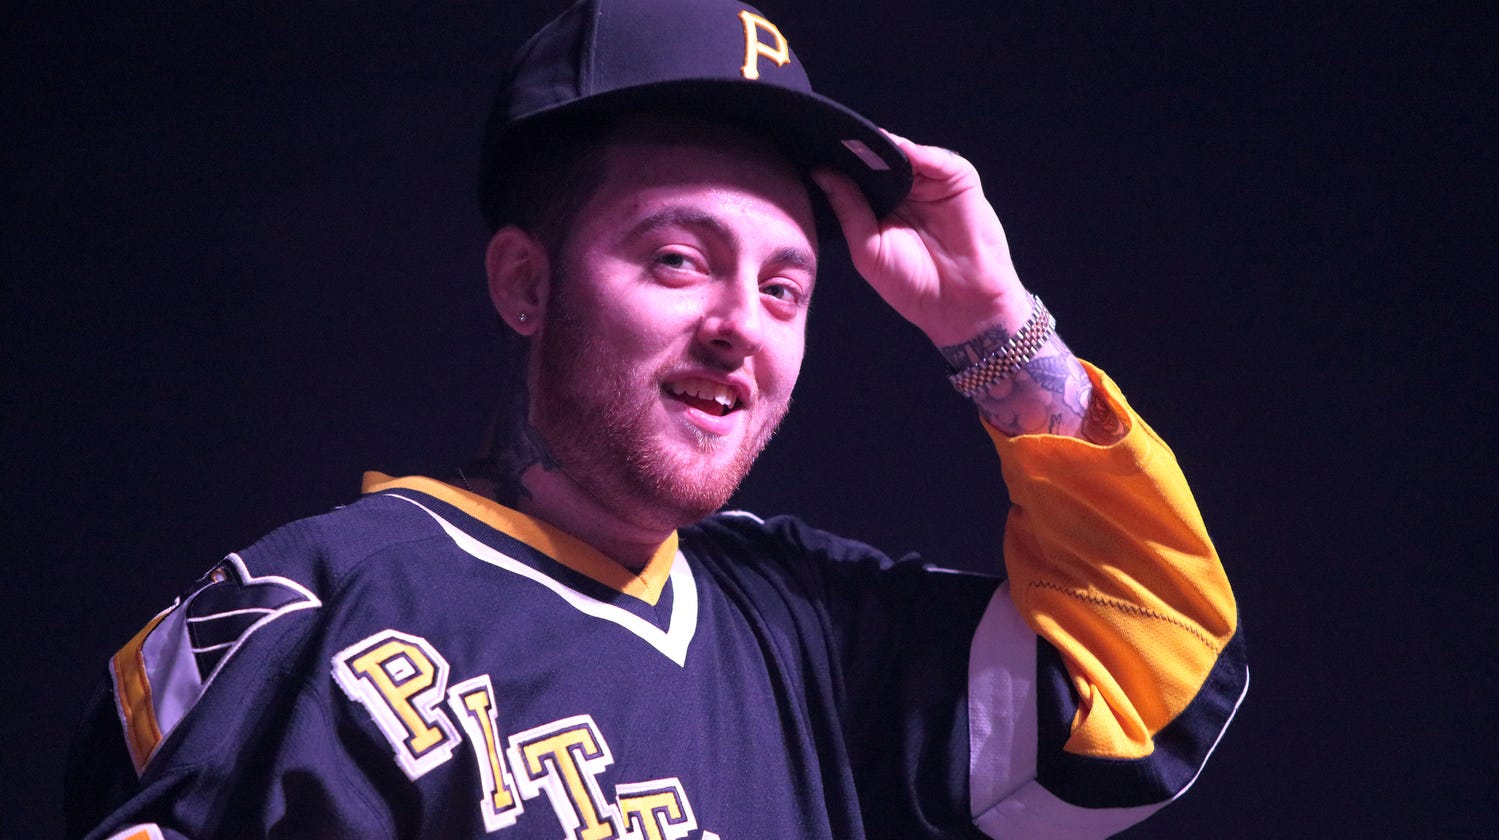 Mac Miller S Death Prompts Hard Lessons About Addiction